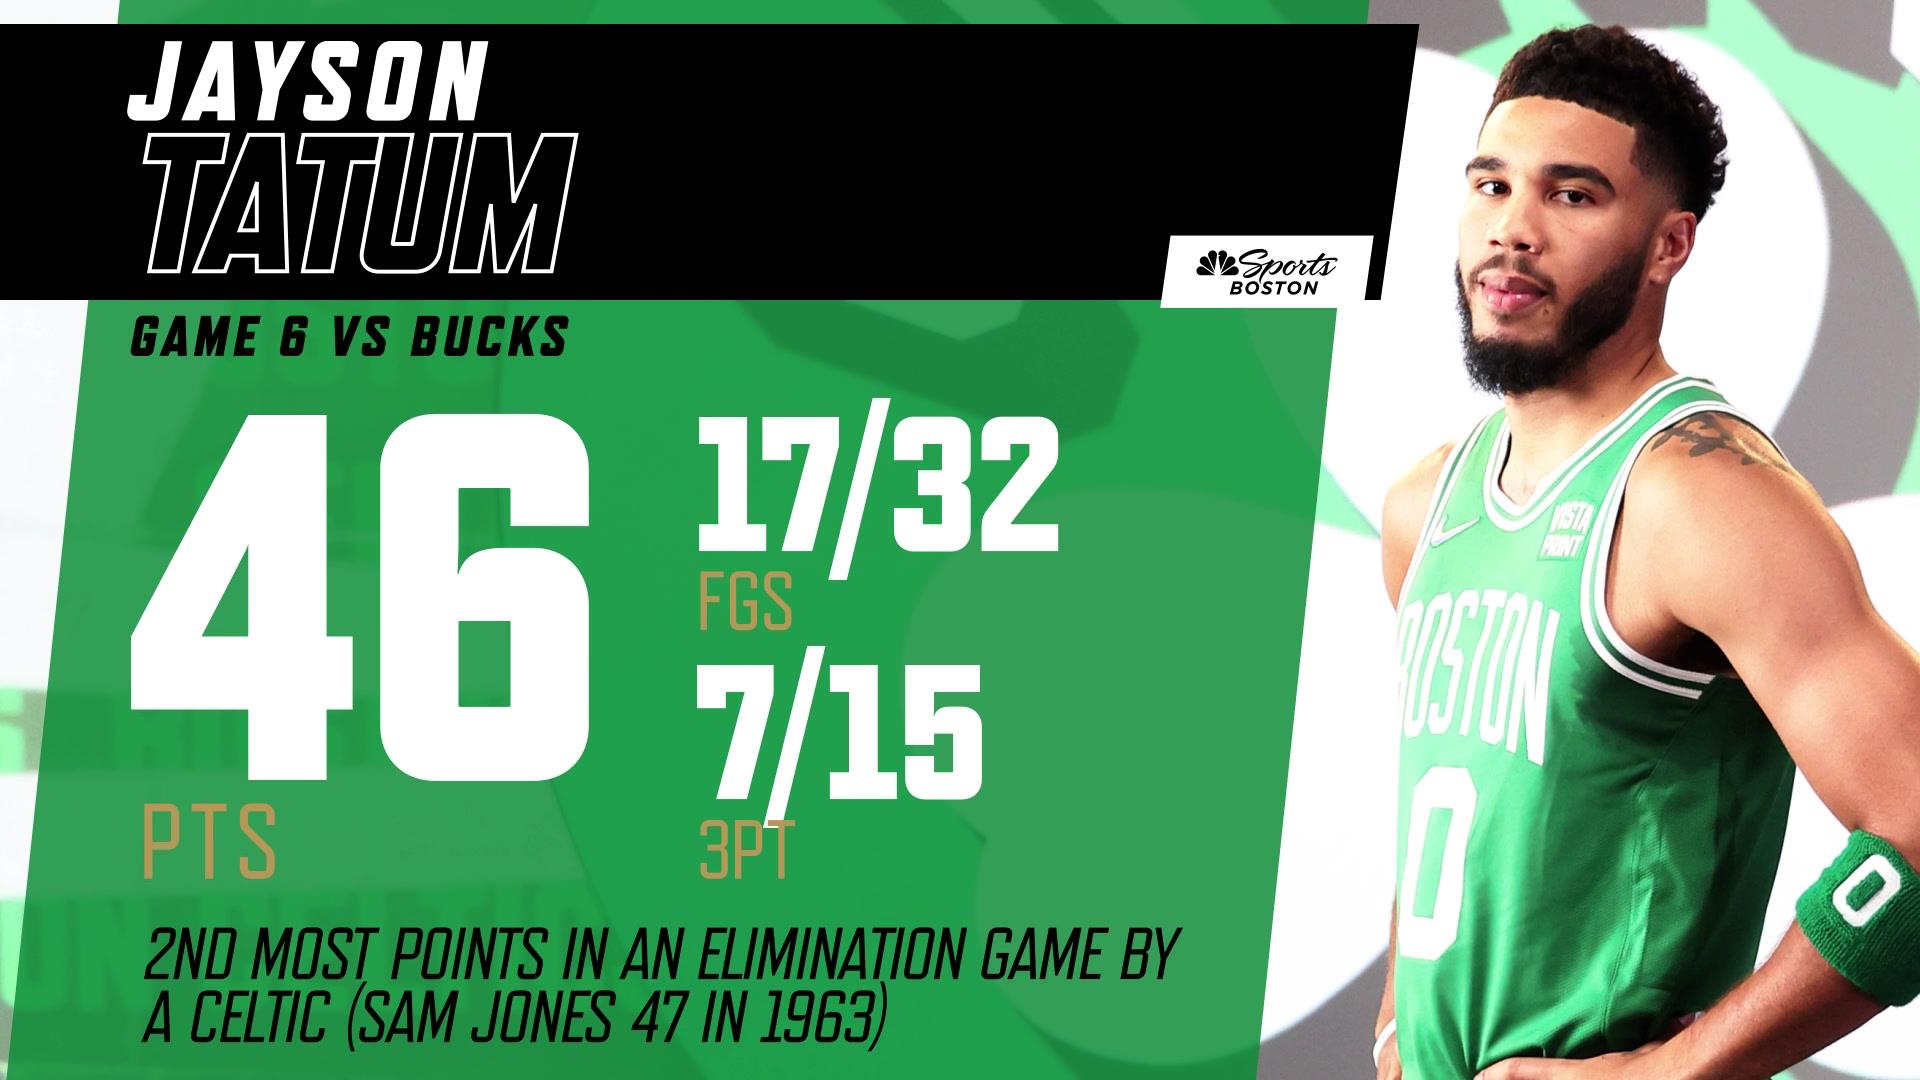 Official Jayson tatum leads all scorers with 34 points t-shirt